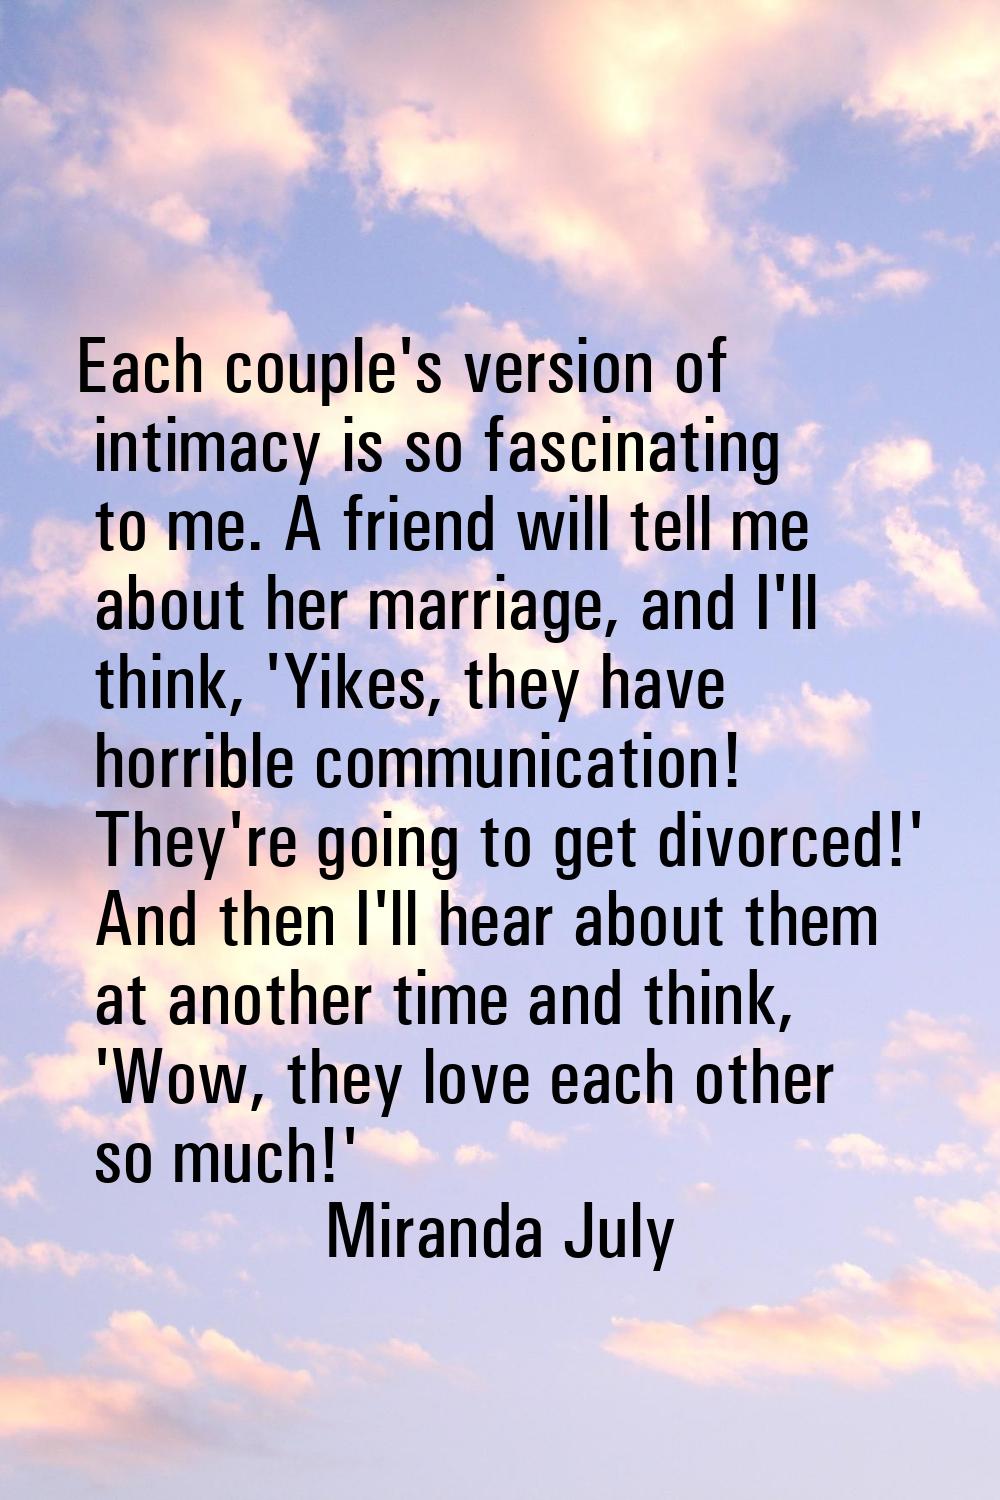 Each couple's version of intimacy is so fascinating to me. A friend will tell me about her marriage